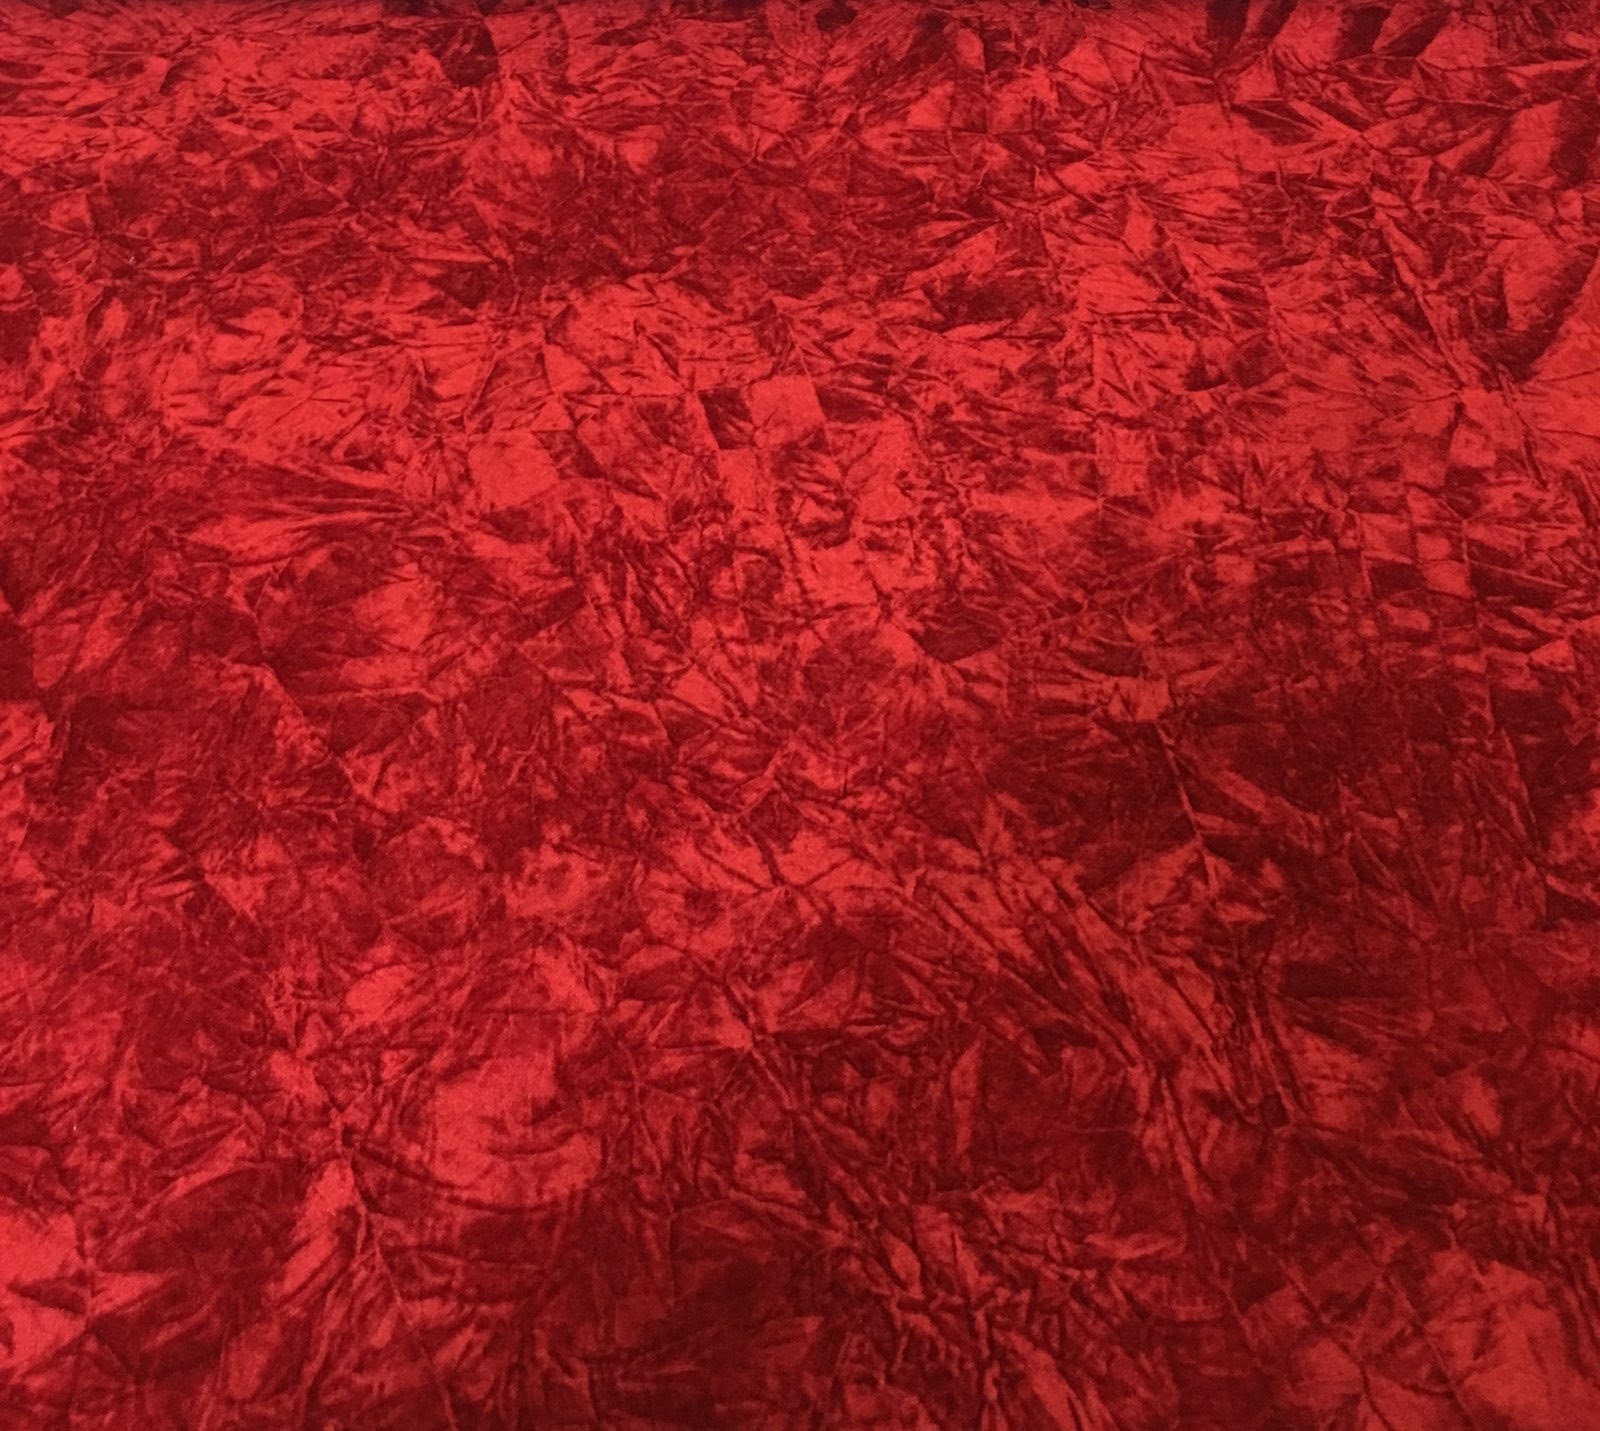 4-Way Stretch Crushed Velvet Fabric - Red